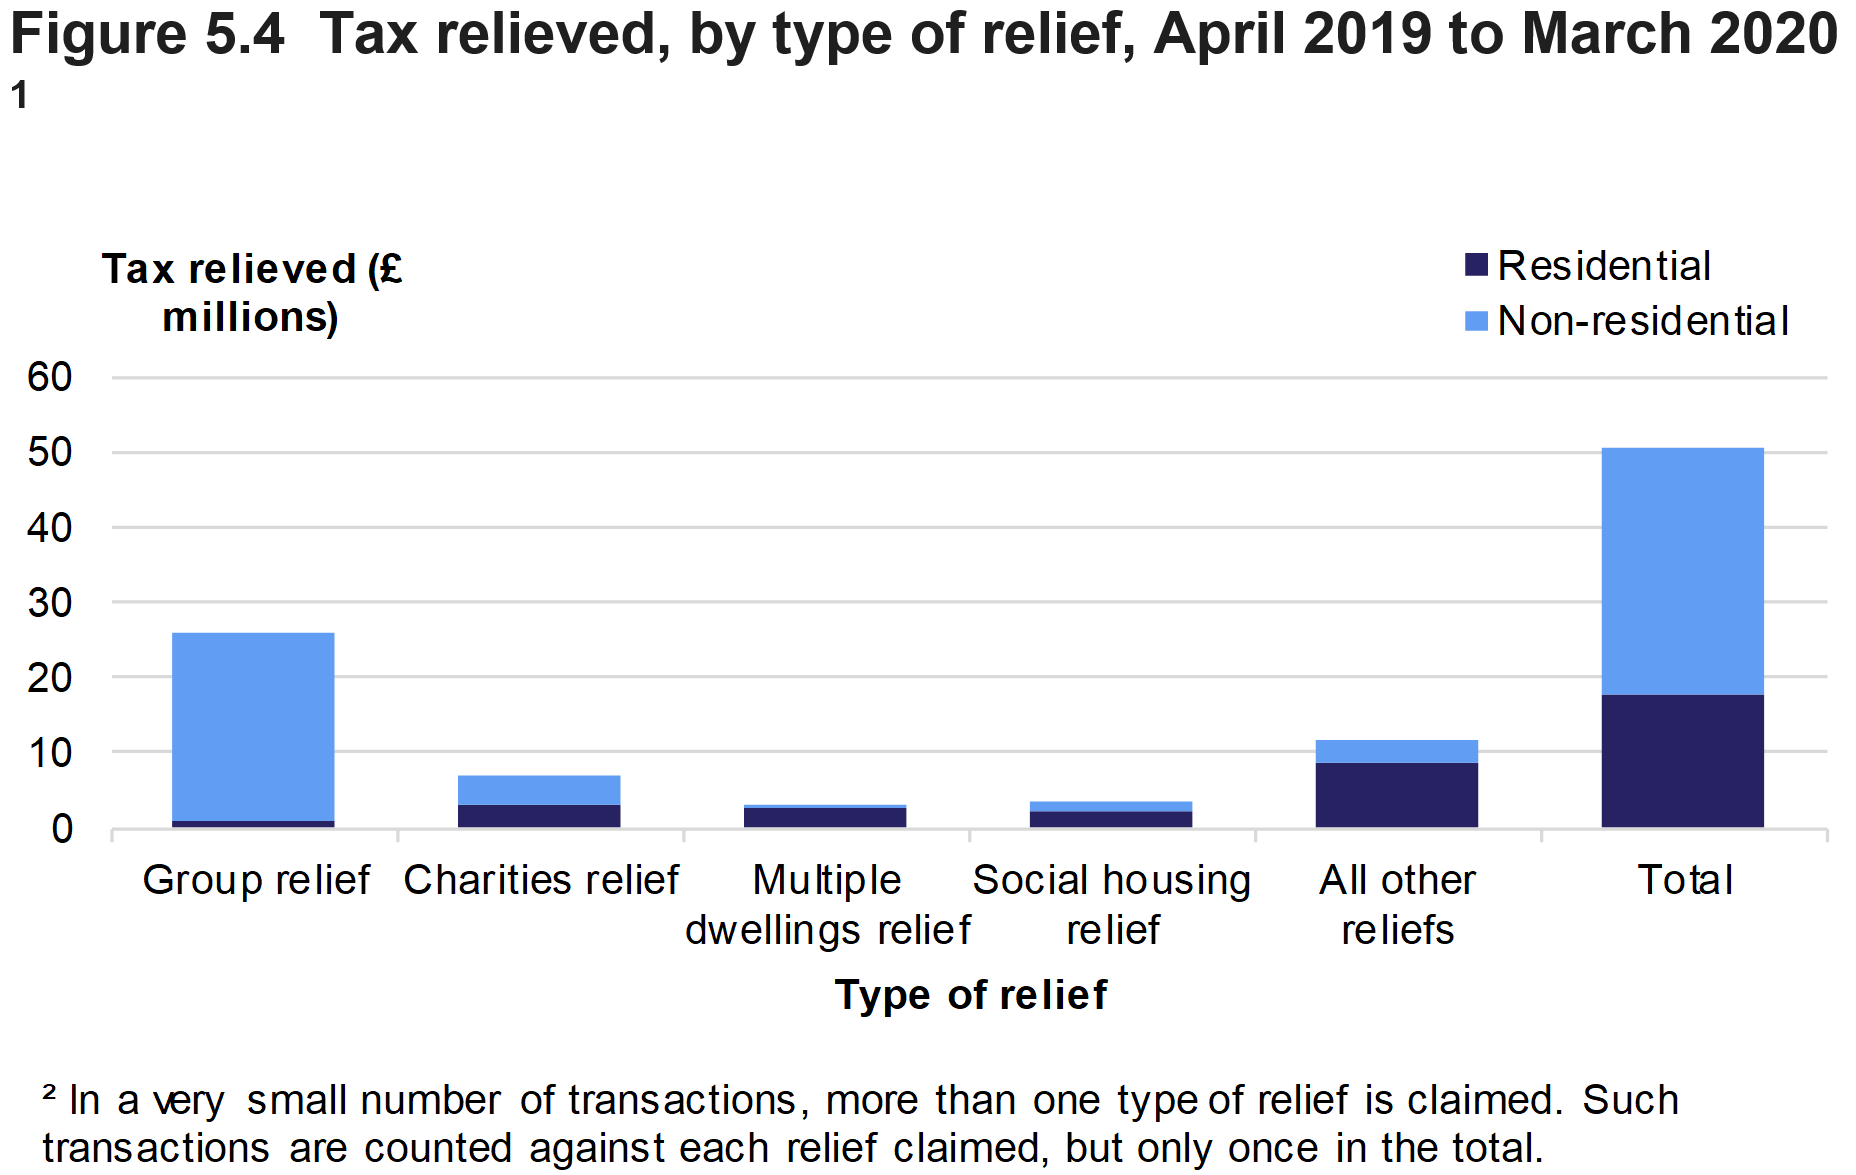 Figure 5.4 shows the amount of tax relieved on residential and non-residential transactions effective in April 2019 to March 2020, by type of relief. 